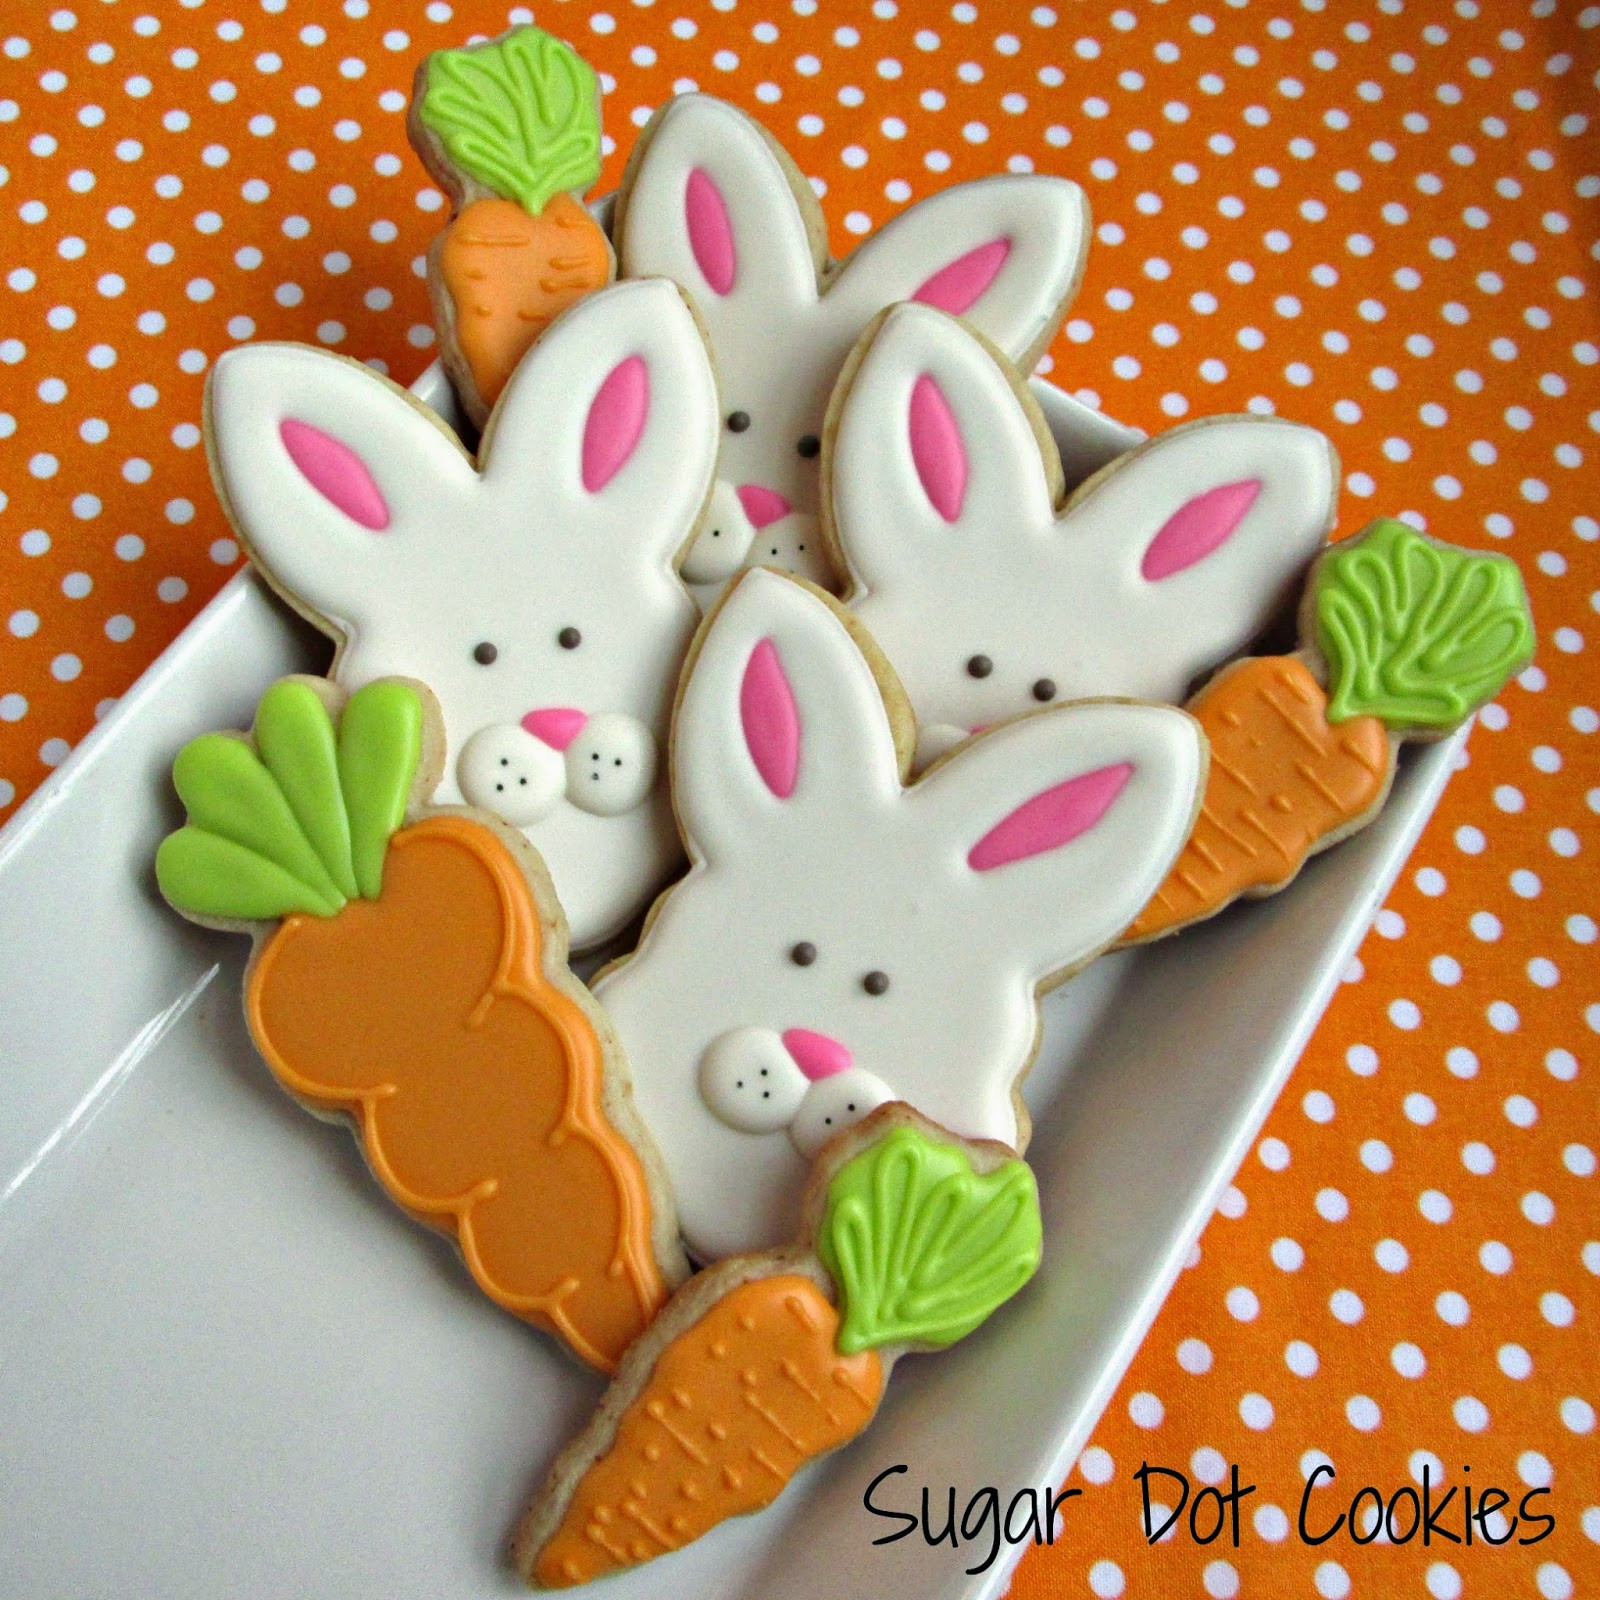 Easter Decorated Sugar Cookies
 I decided to play around with the bunny face cookies this